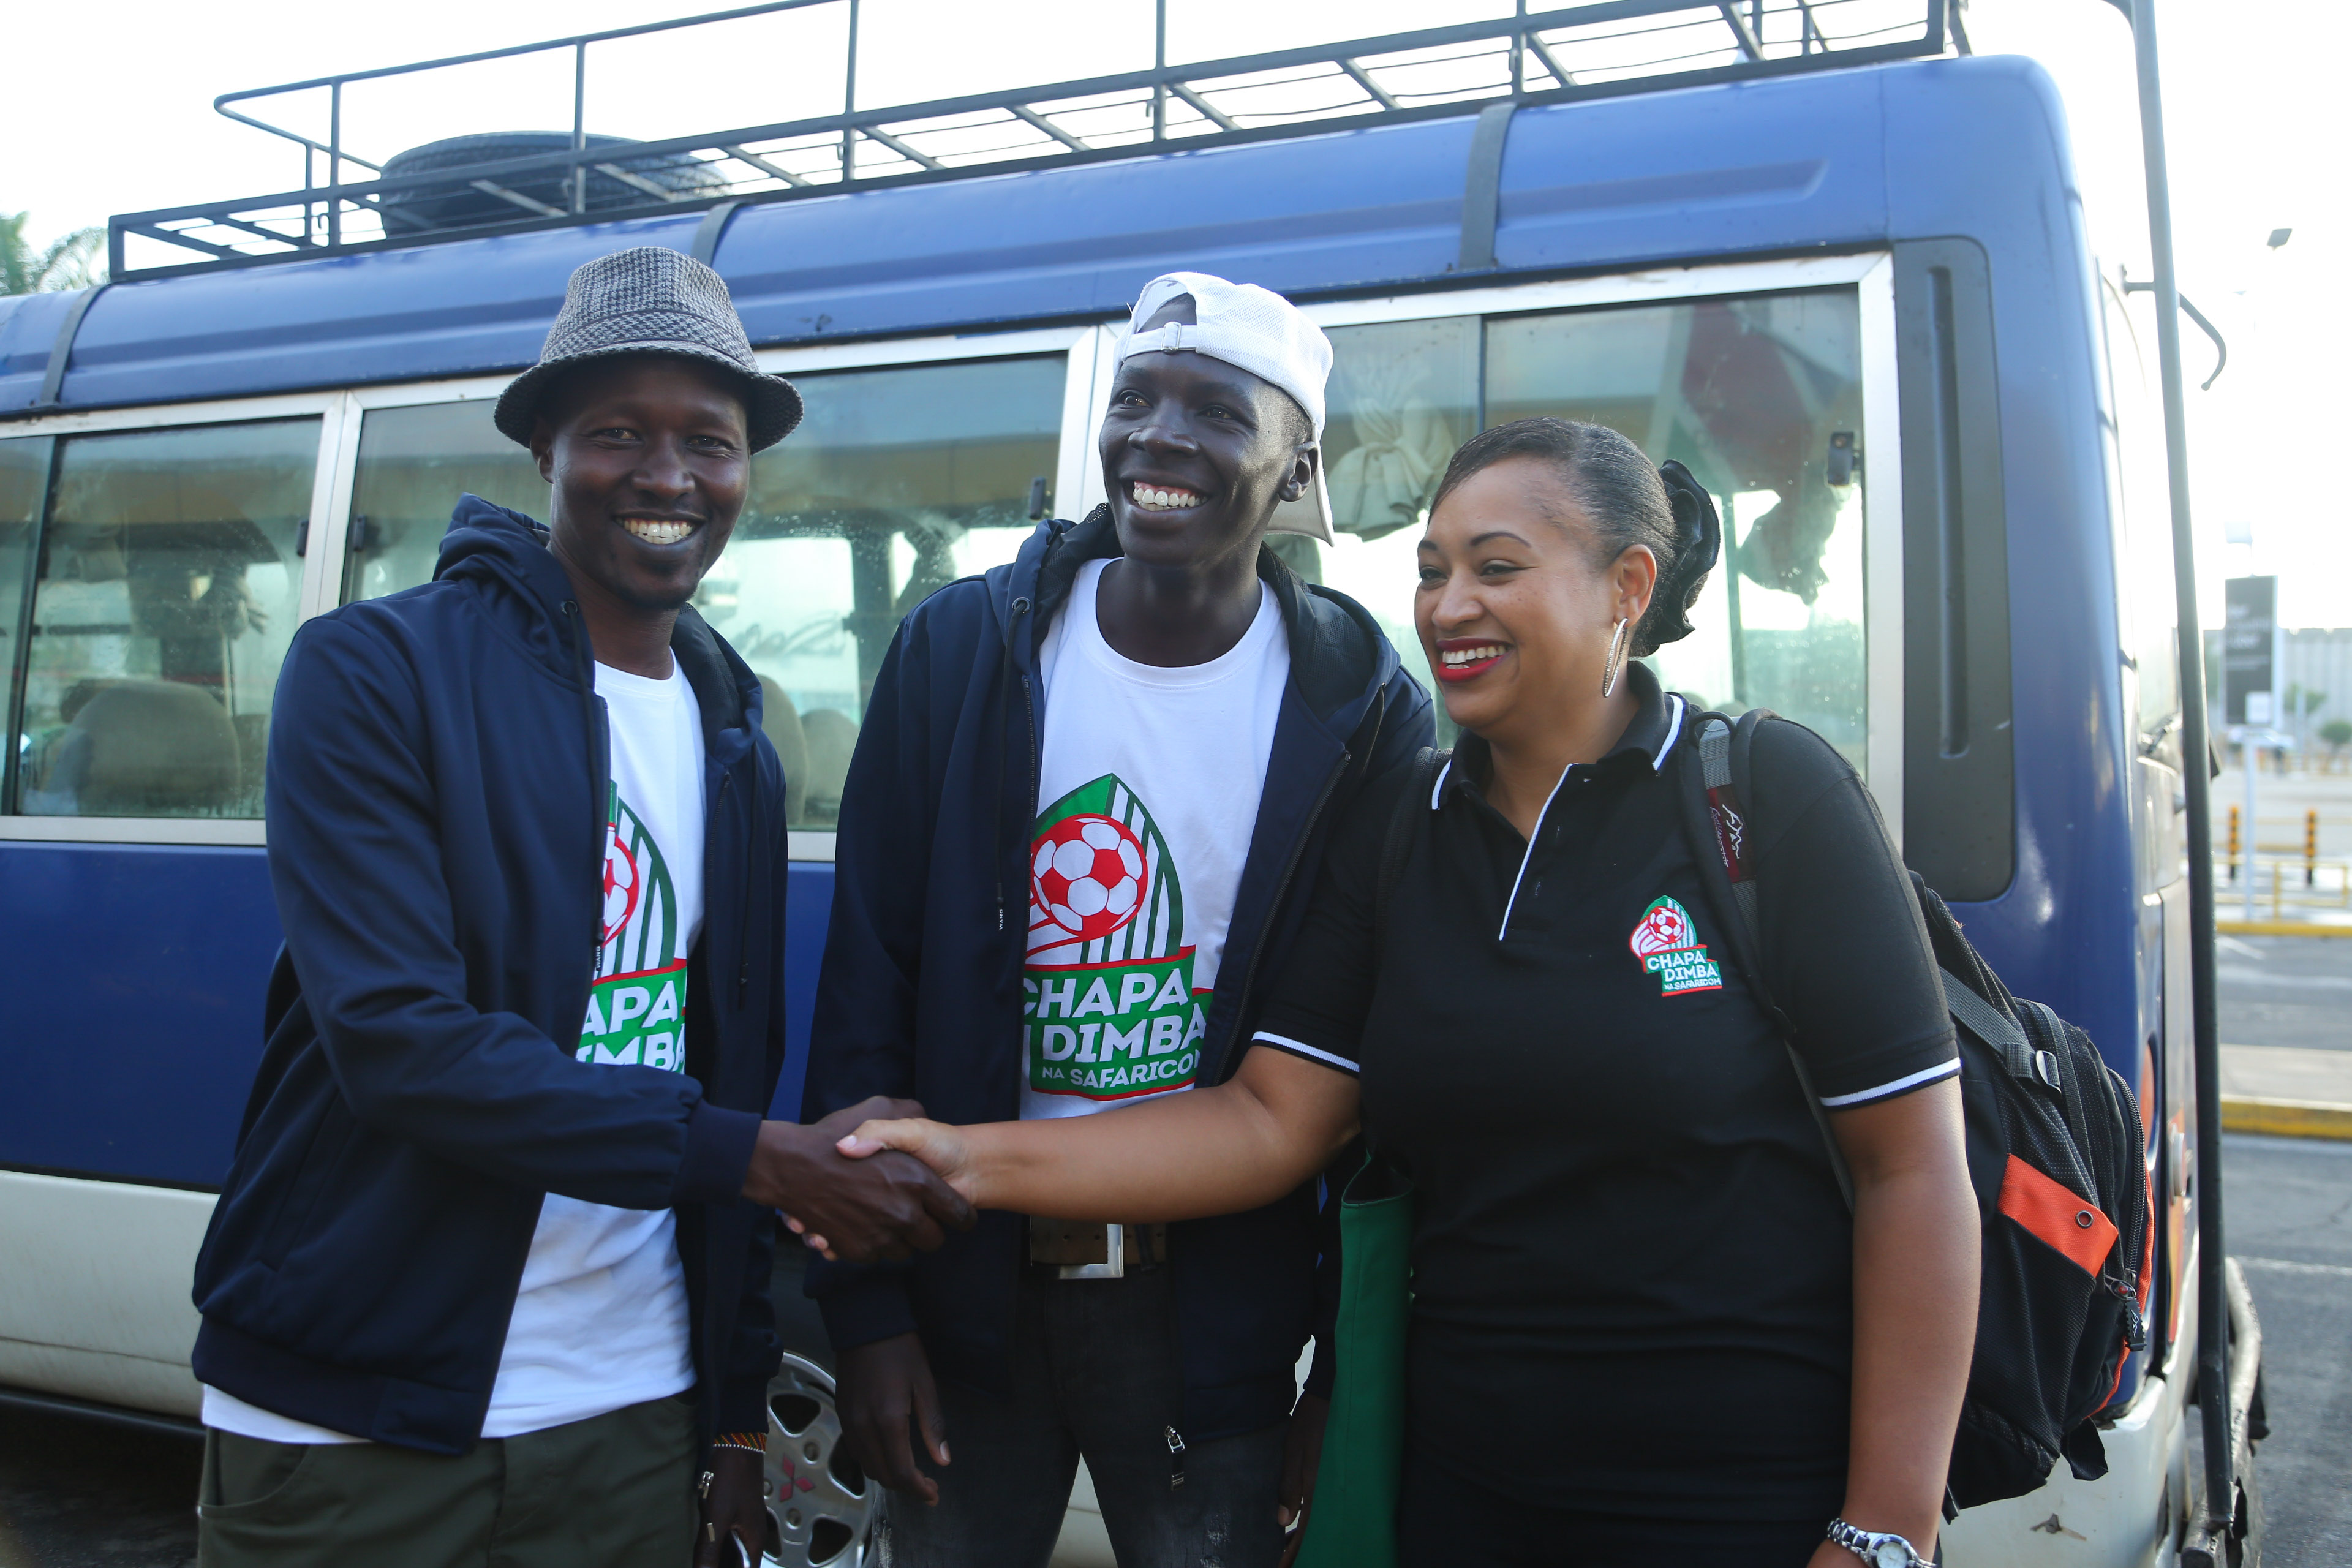 Kapenguria Heroes team manager Kenneth Mnang’at alongside one of his players Beko Gilbert receive last journey bids from Latifa Maredith of EXP Agency, before their check-in for their travel to London at the Jomo Kenyatta International Airport - Bizna